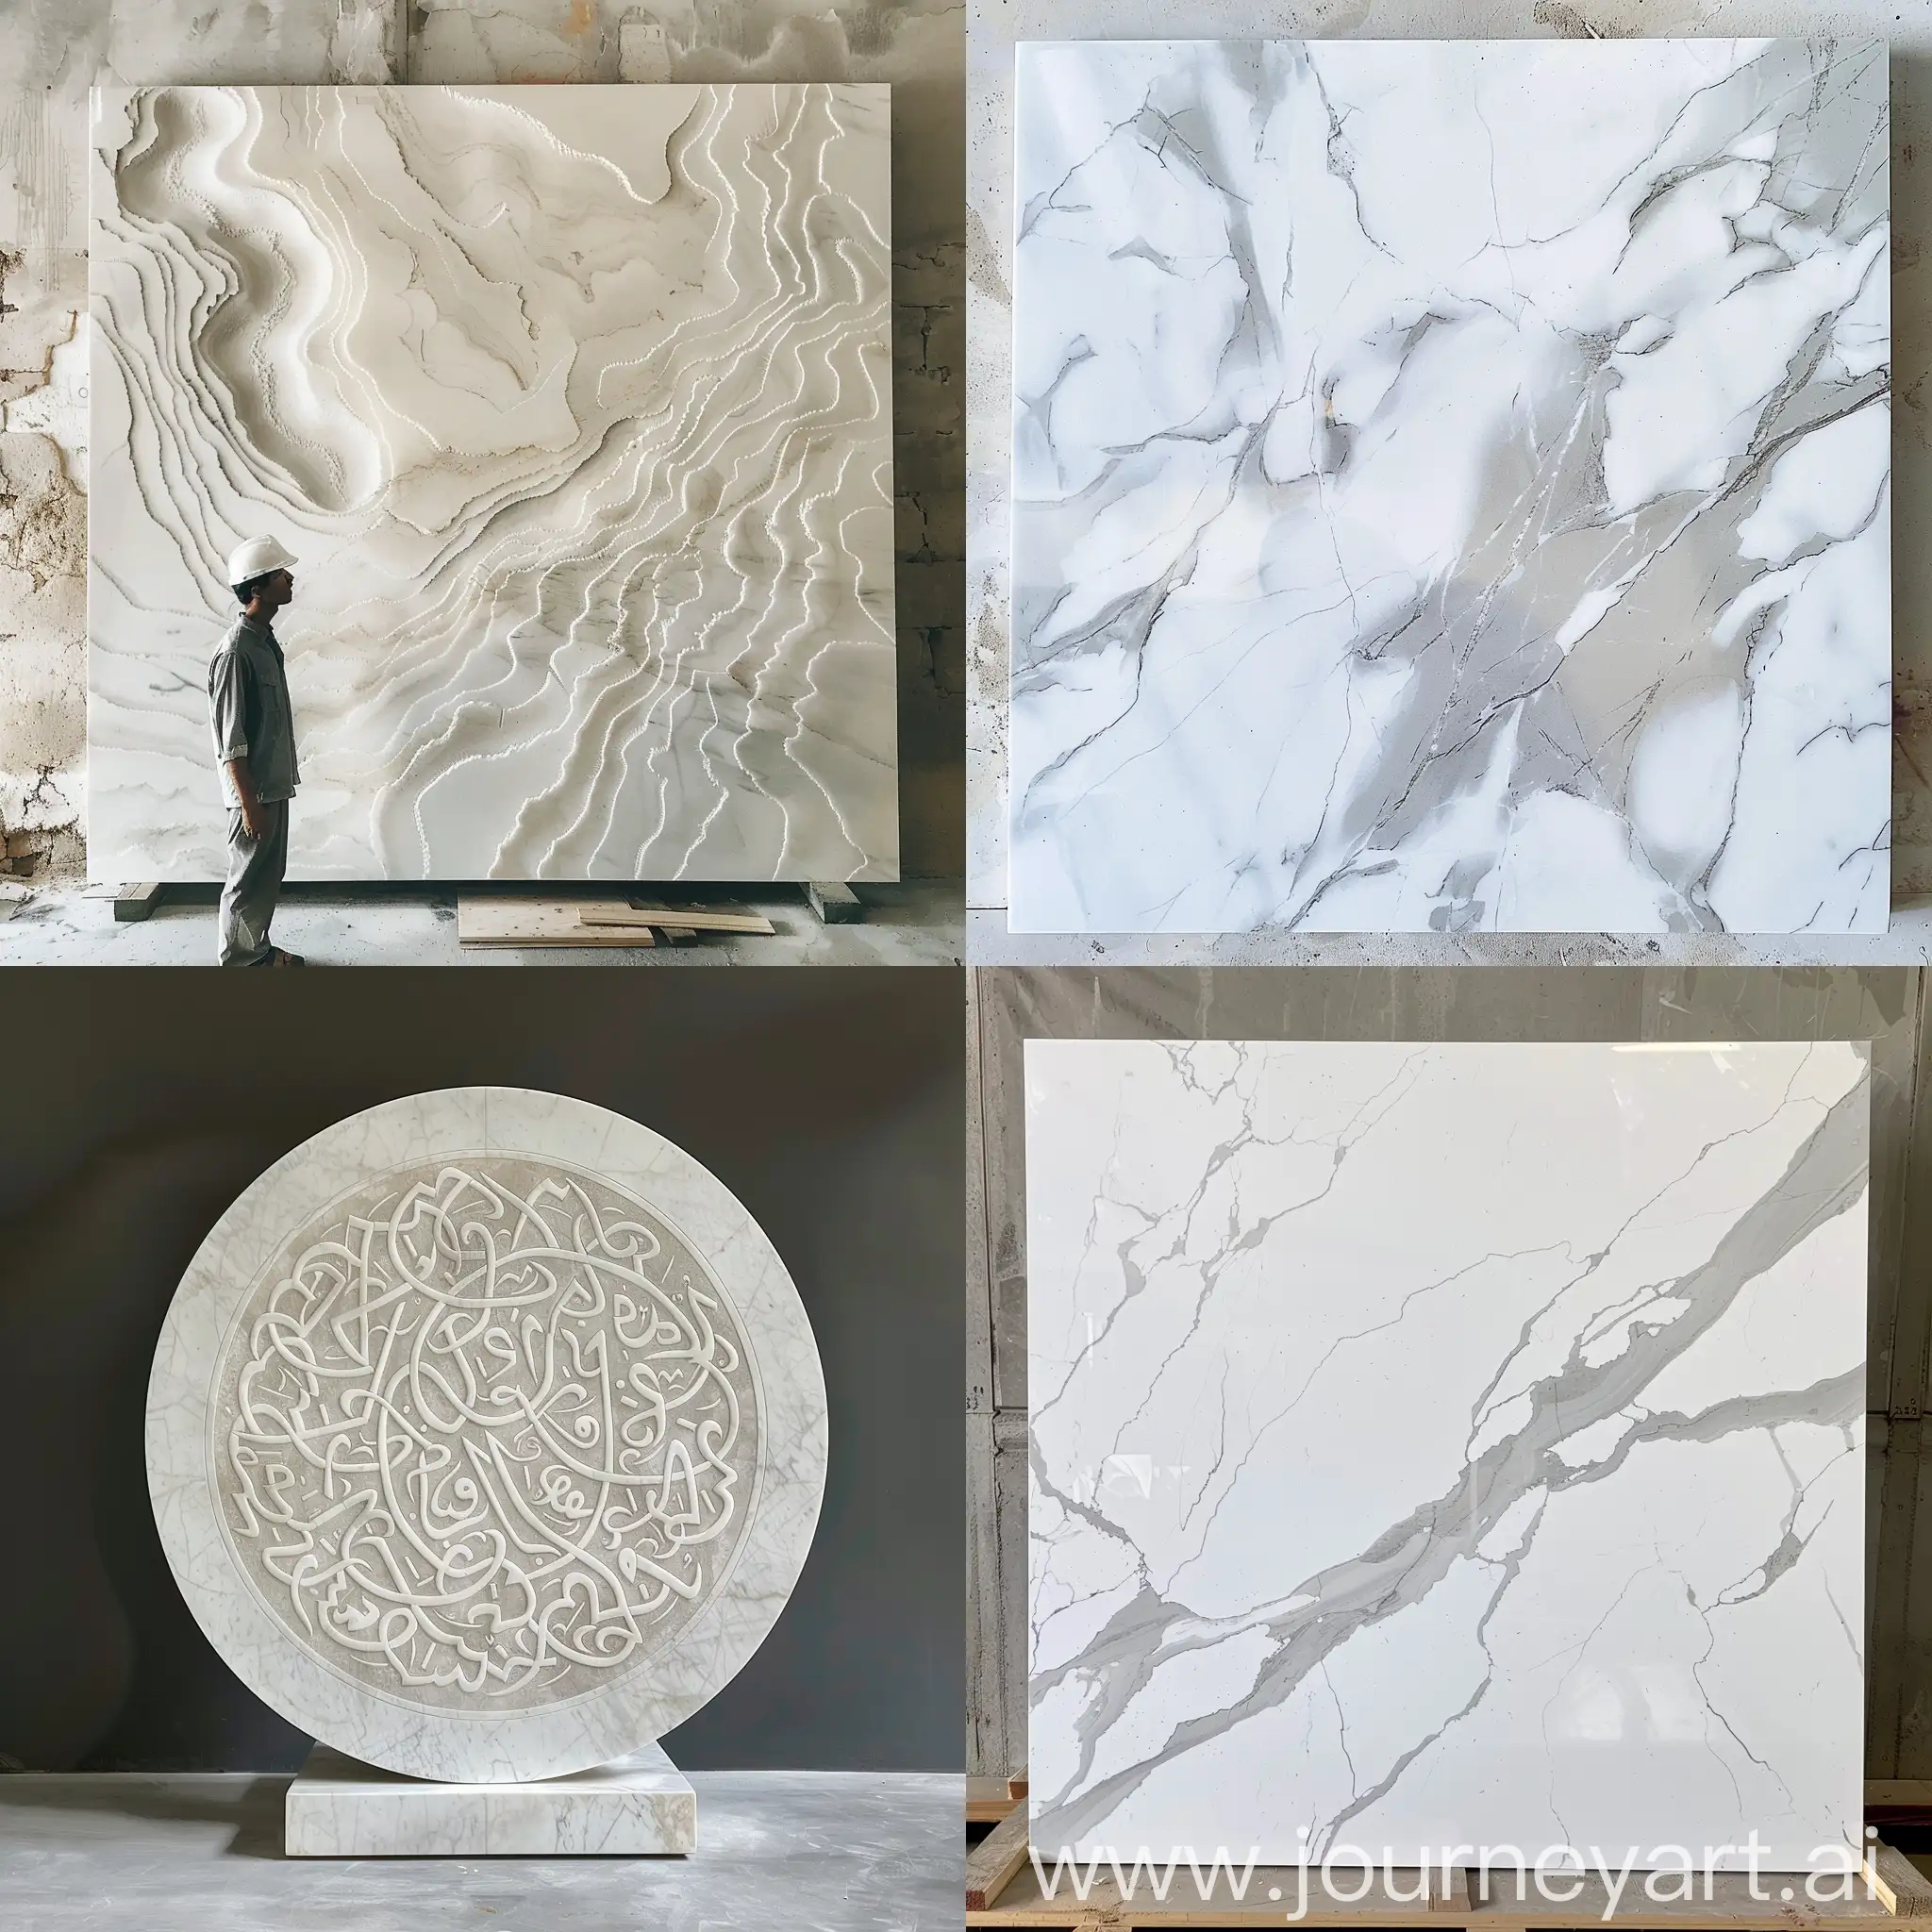 Creating-Rumi-Patterns-on-a-Large-White-Marble-Surface